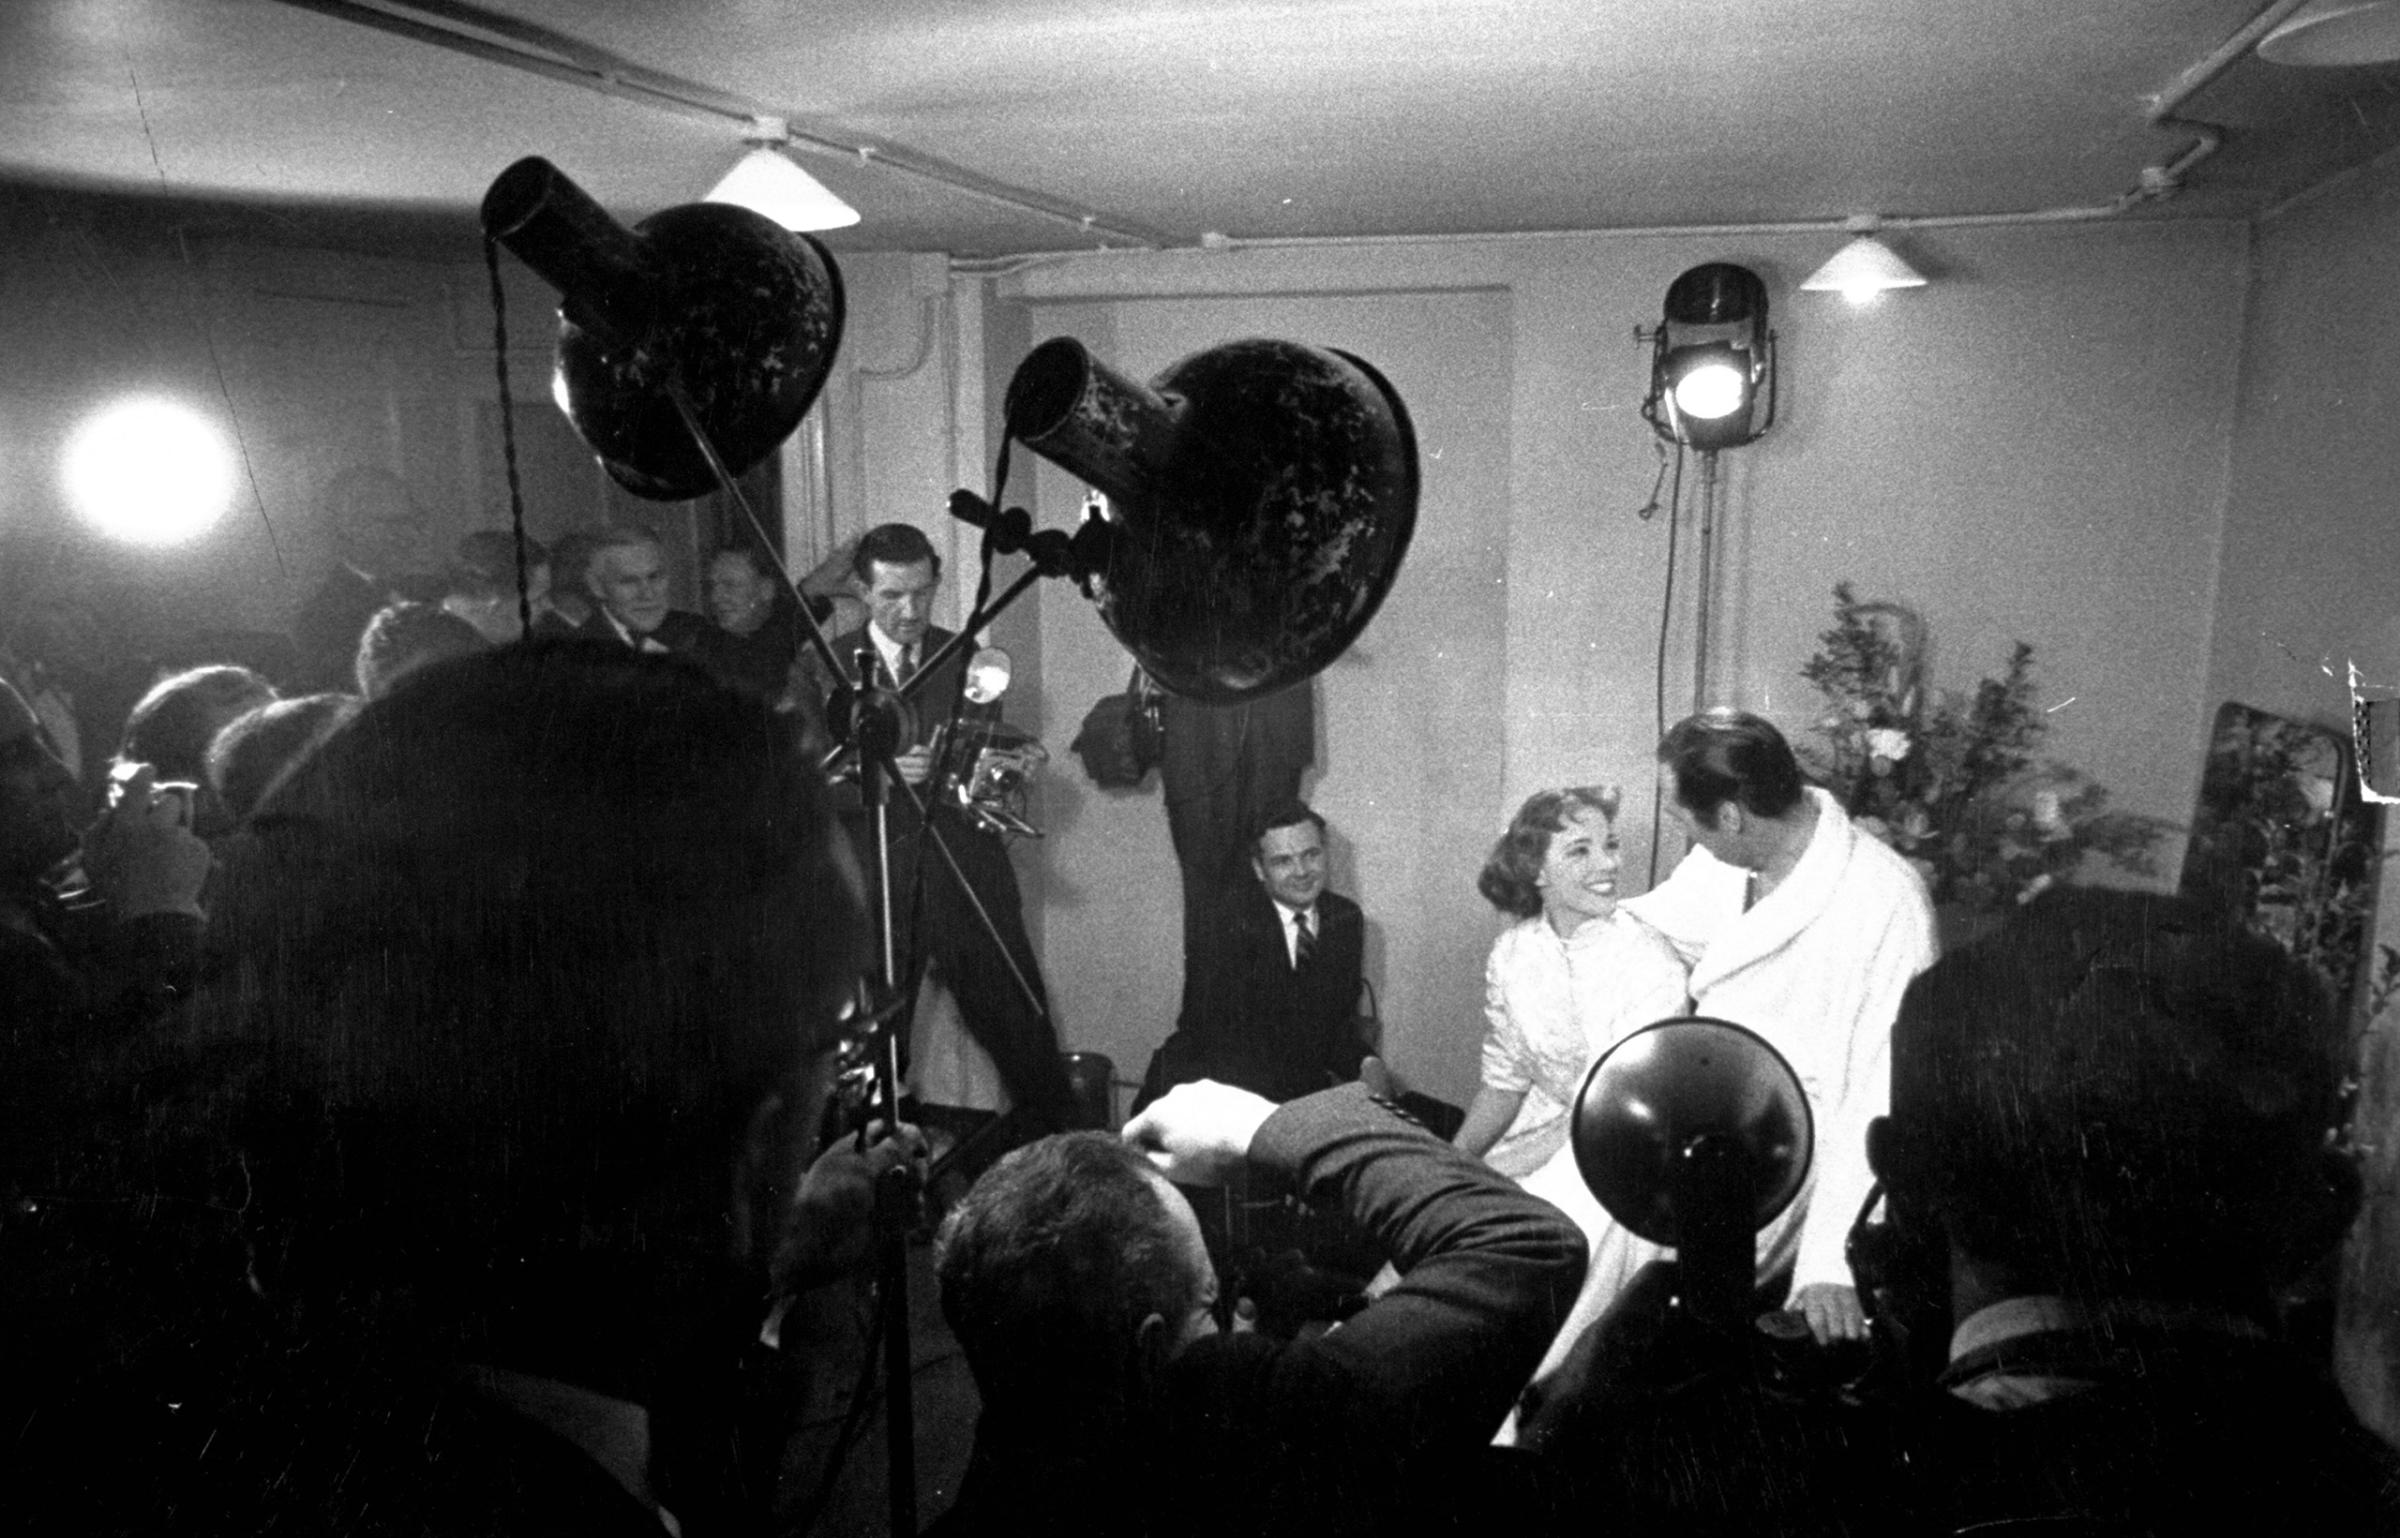 Actor Rex Harrison and Actress Julie Andrews during a TV interview.